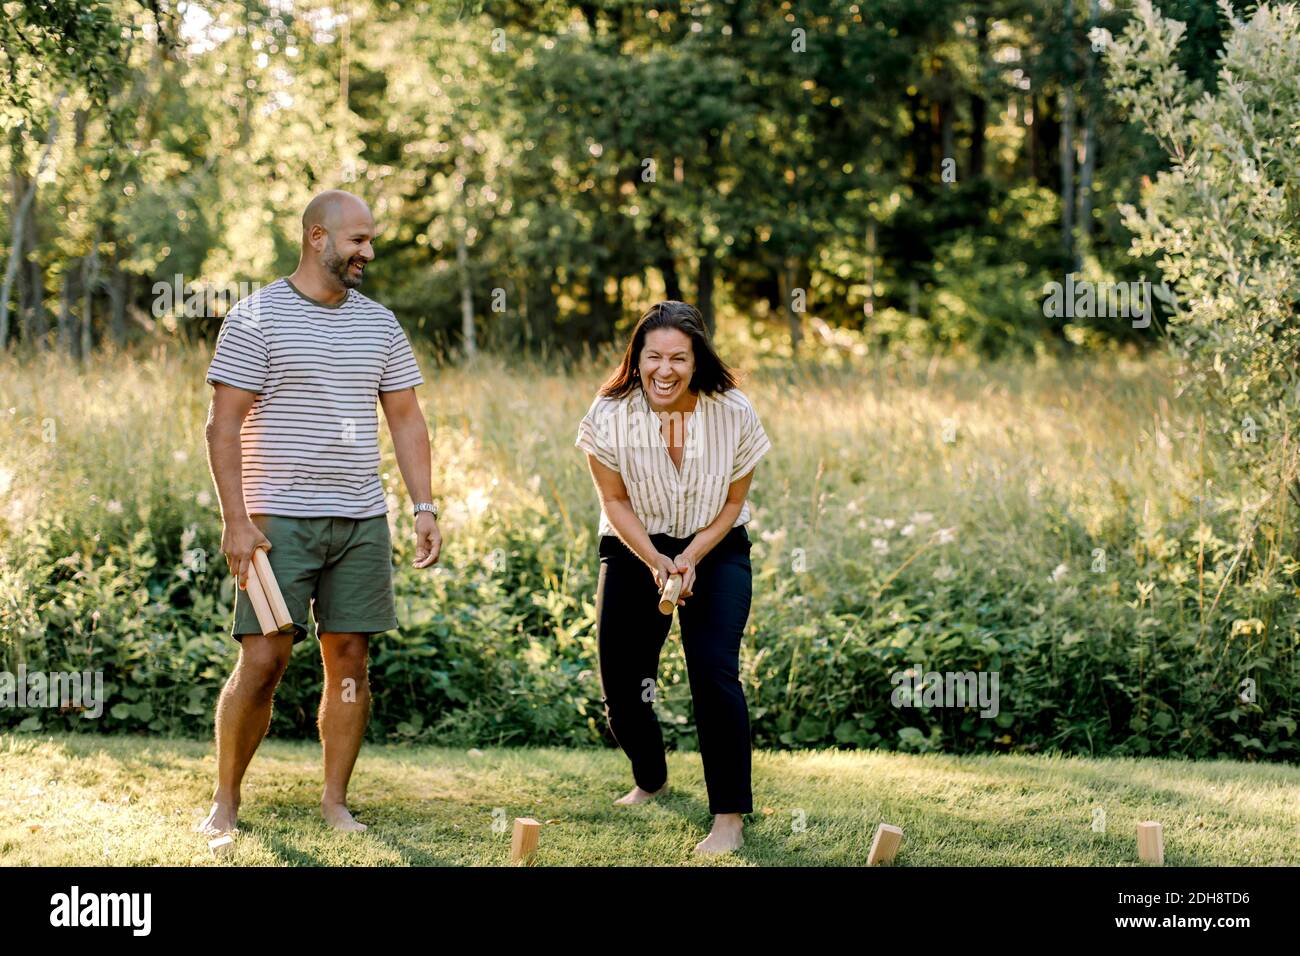 Cheerful woman with male partner playing molkky in yard Stock Photo